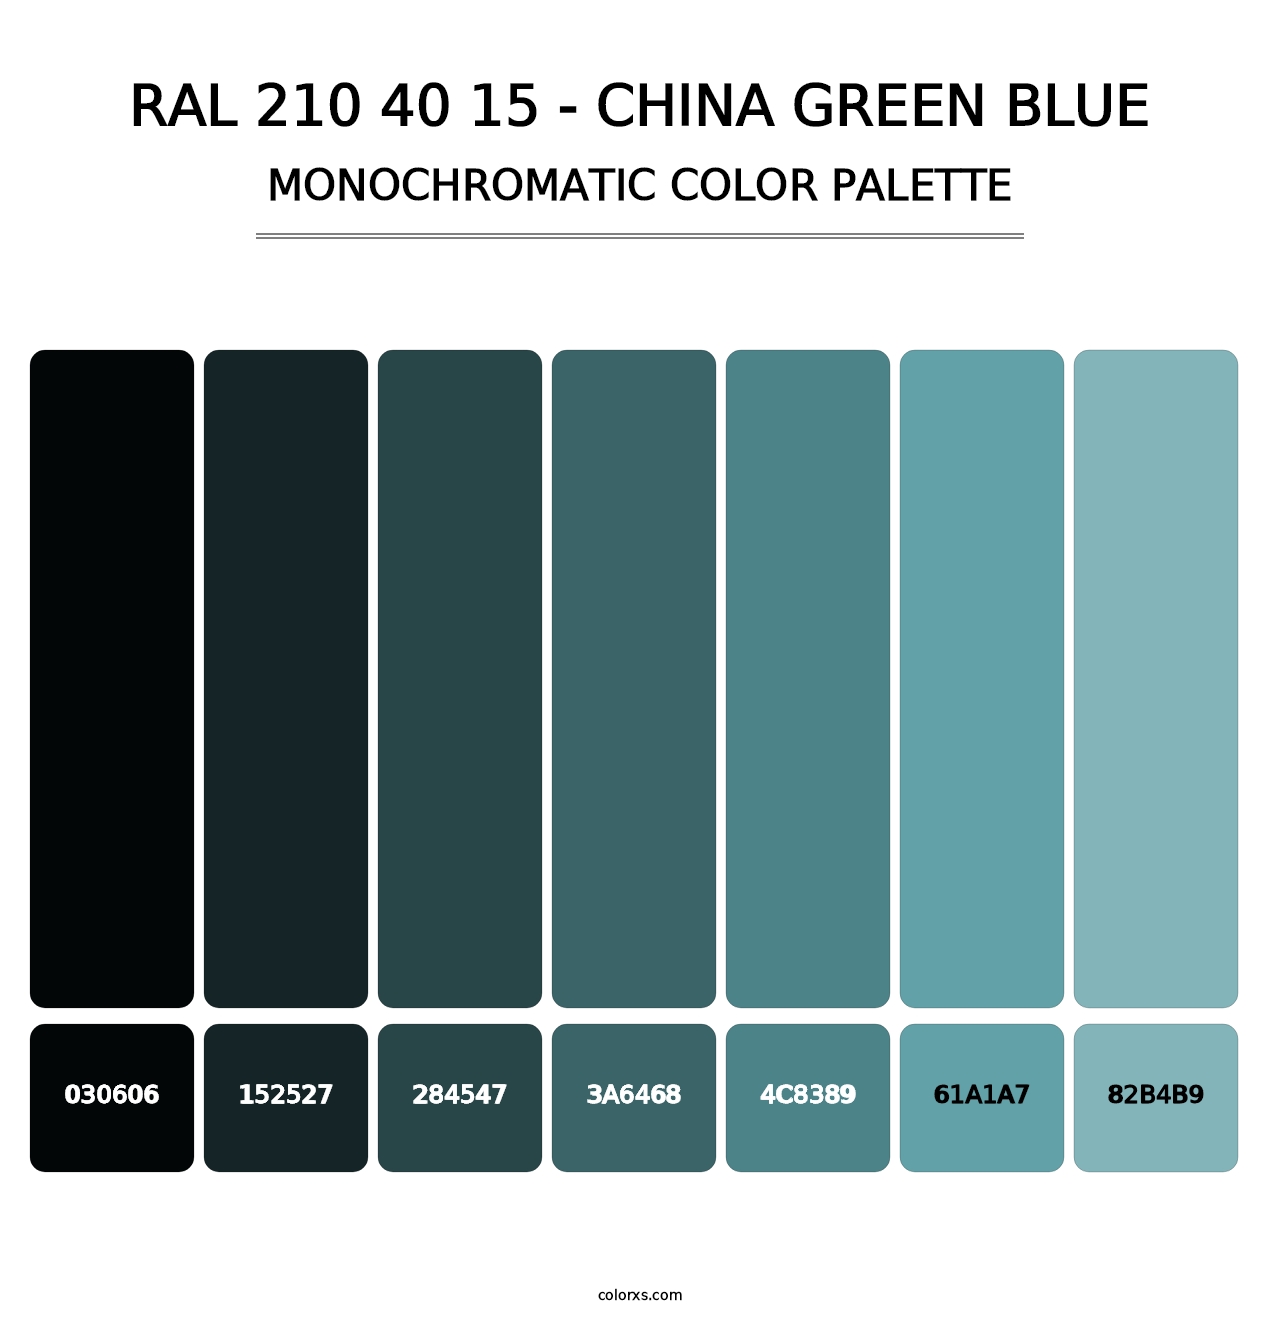 RAL 210 40 15 - China Green Blue - Monochromatic Color Palette